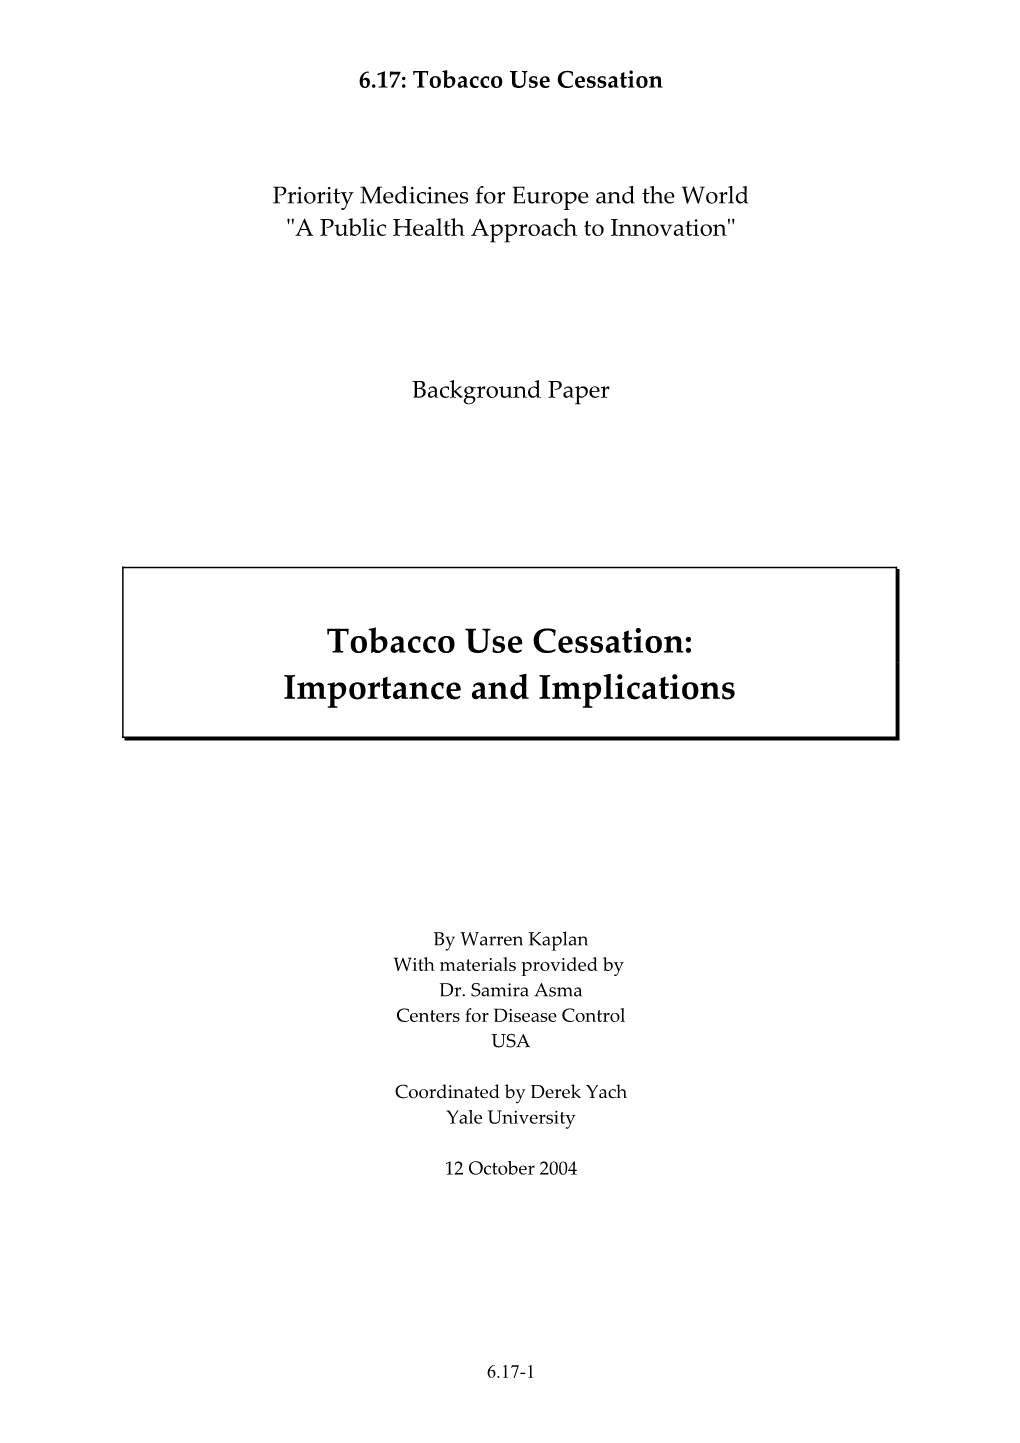 Nicotine Replacement Products and Government Policies